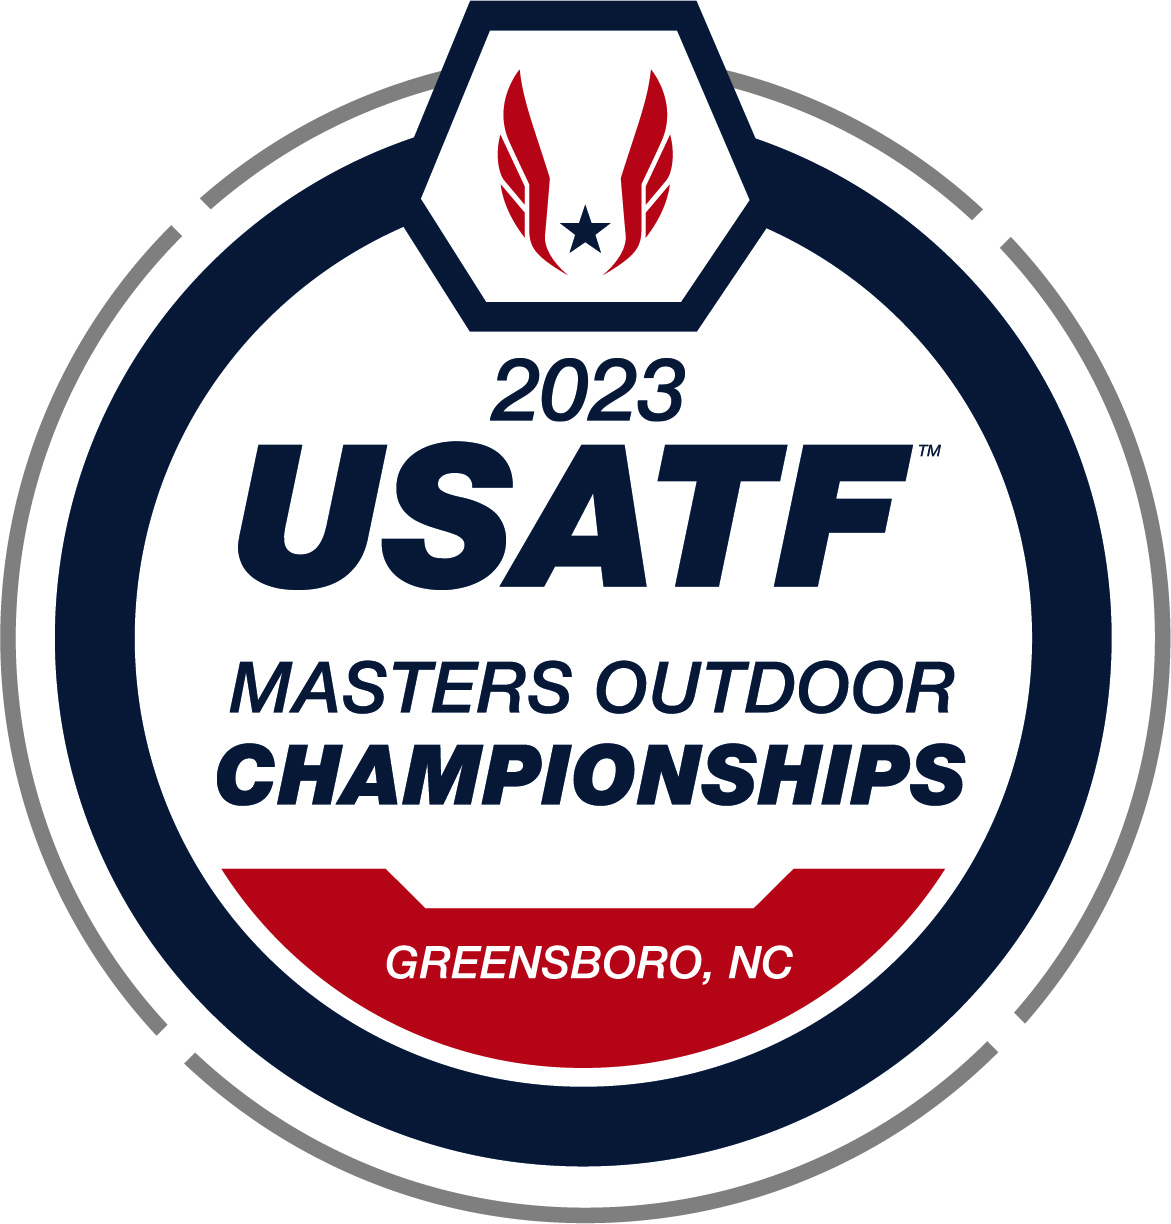 I am here in Greensboro, NC for the 2023 @USATF Masters Outdoor